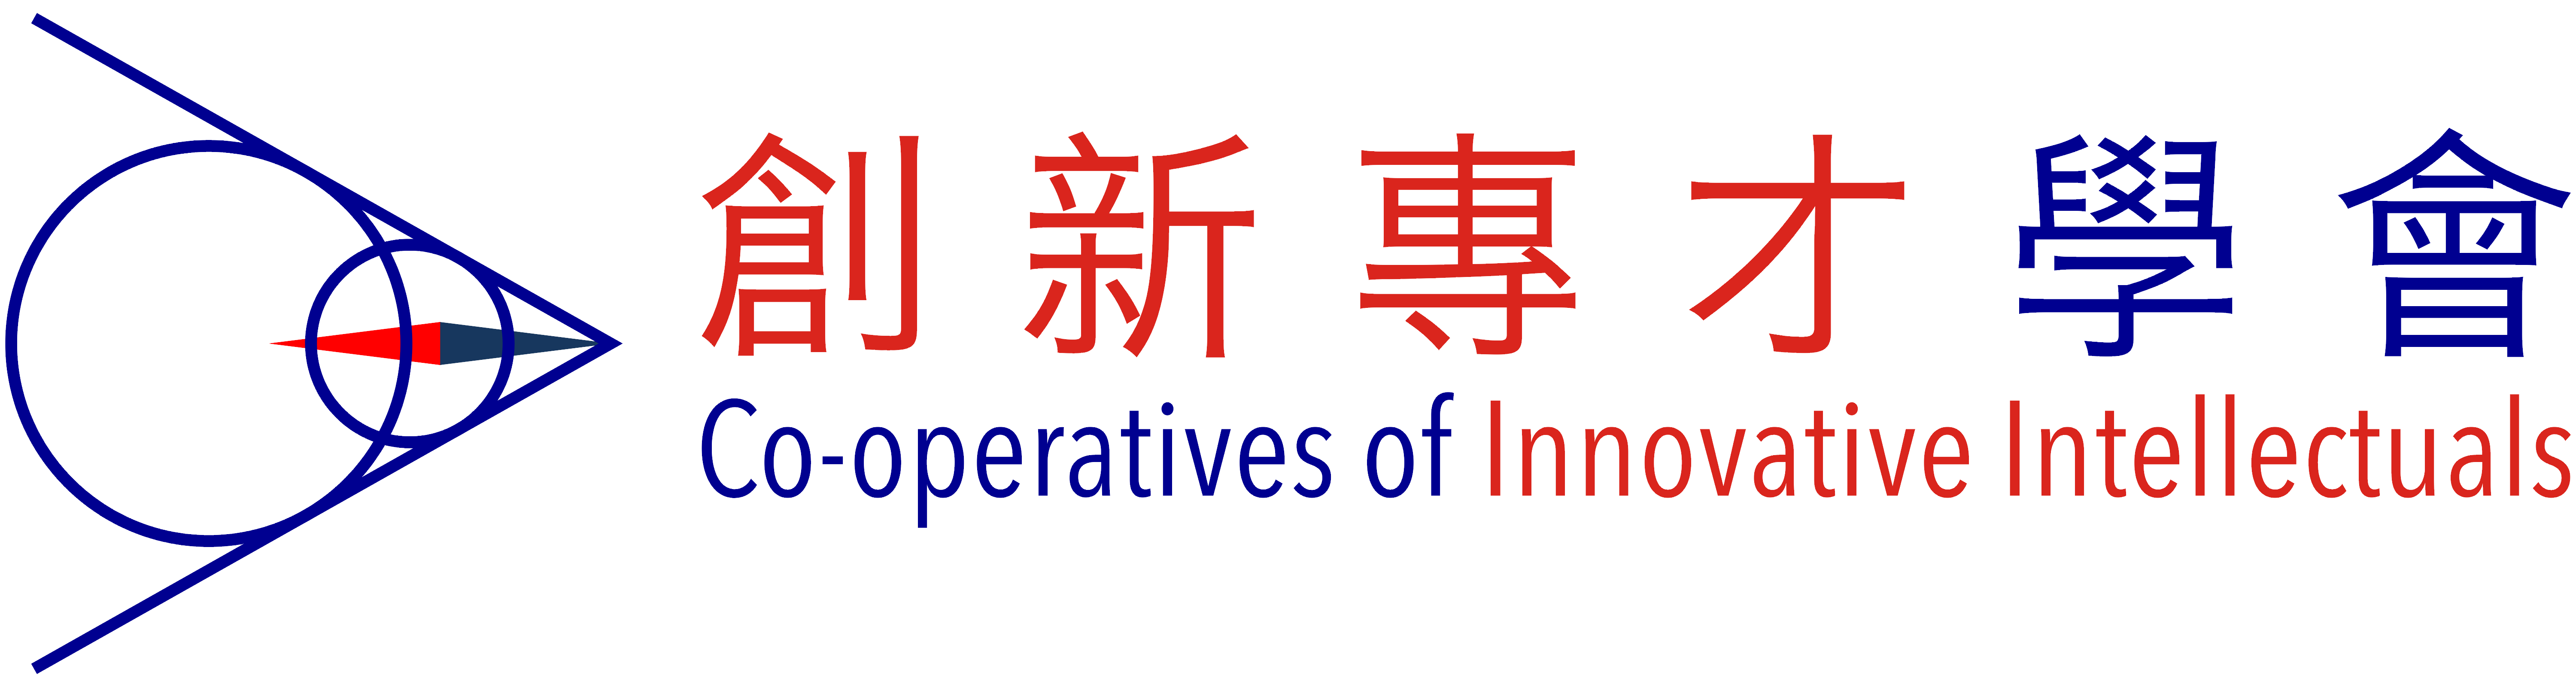 Co-operatives of Innovative Intellectuals